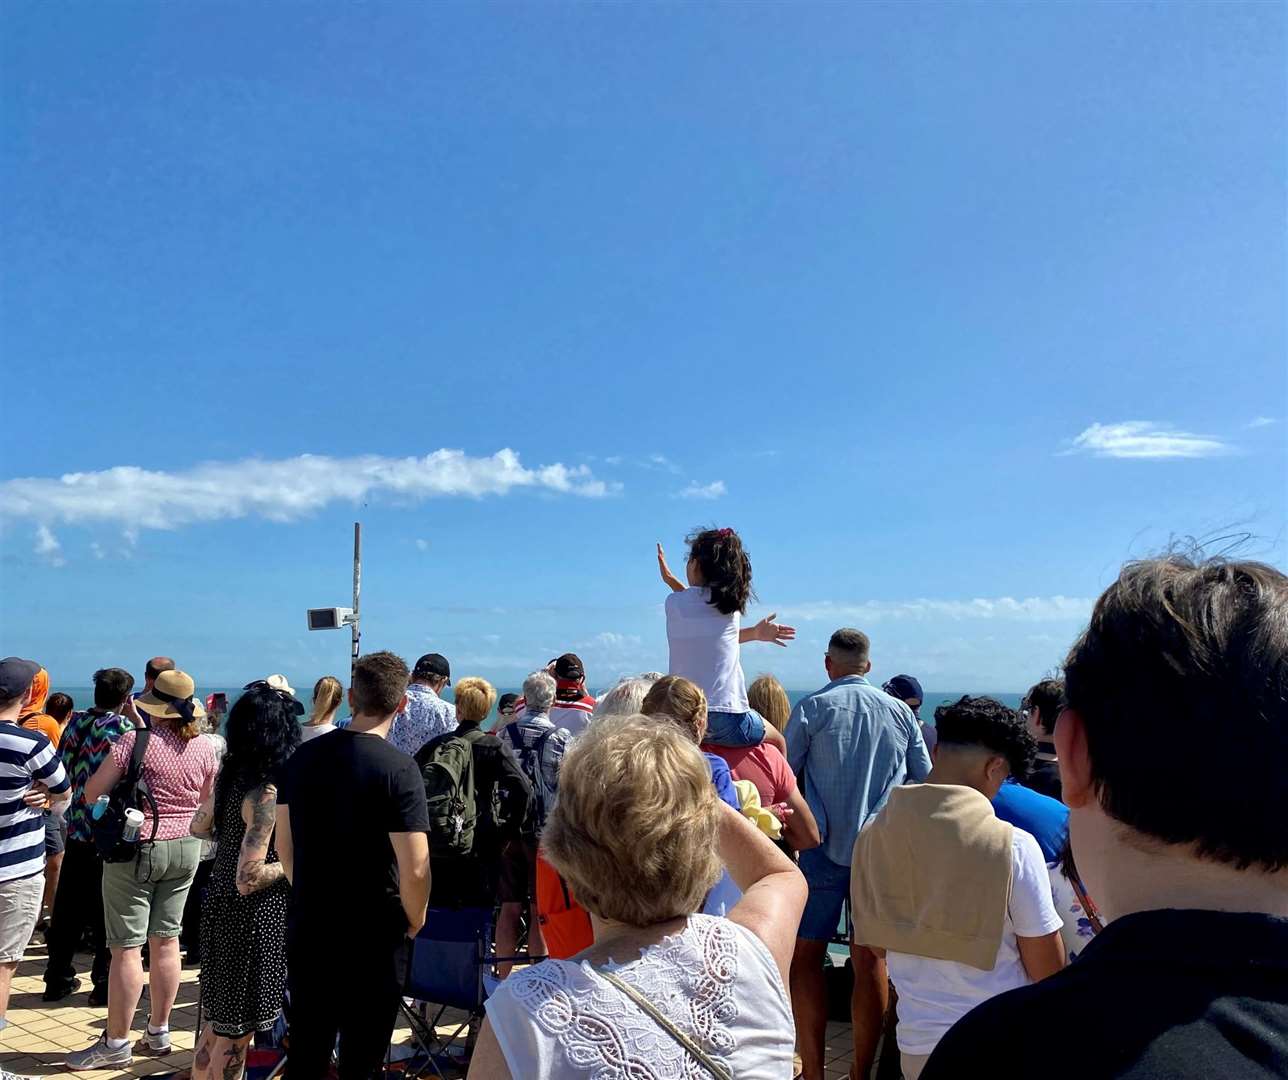 Thousands of people came to the seafront to watch the airshow in Folkestone. Picture: Folkestone and Hythe District Council